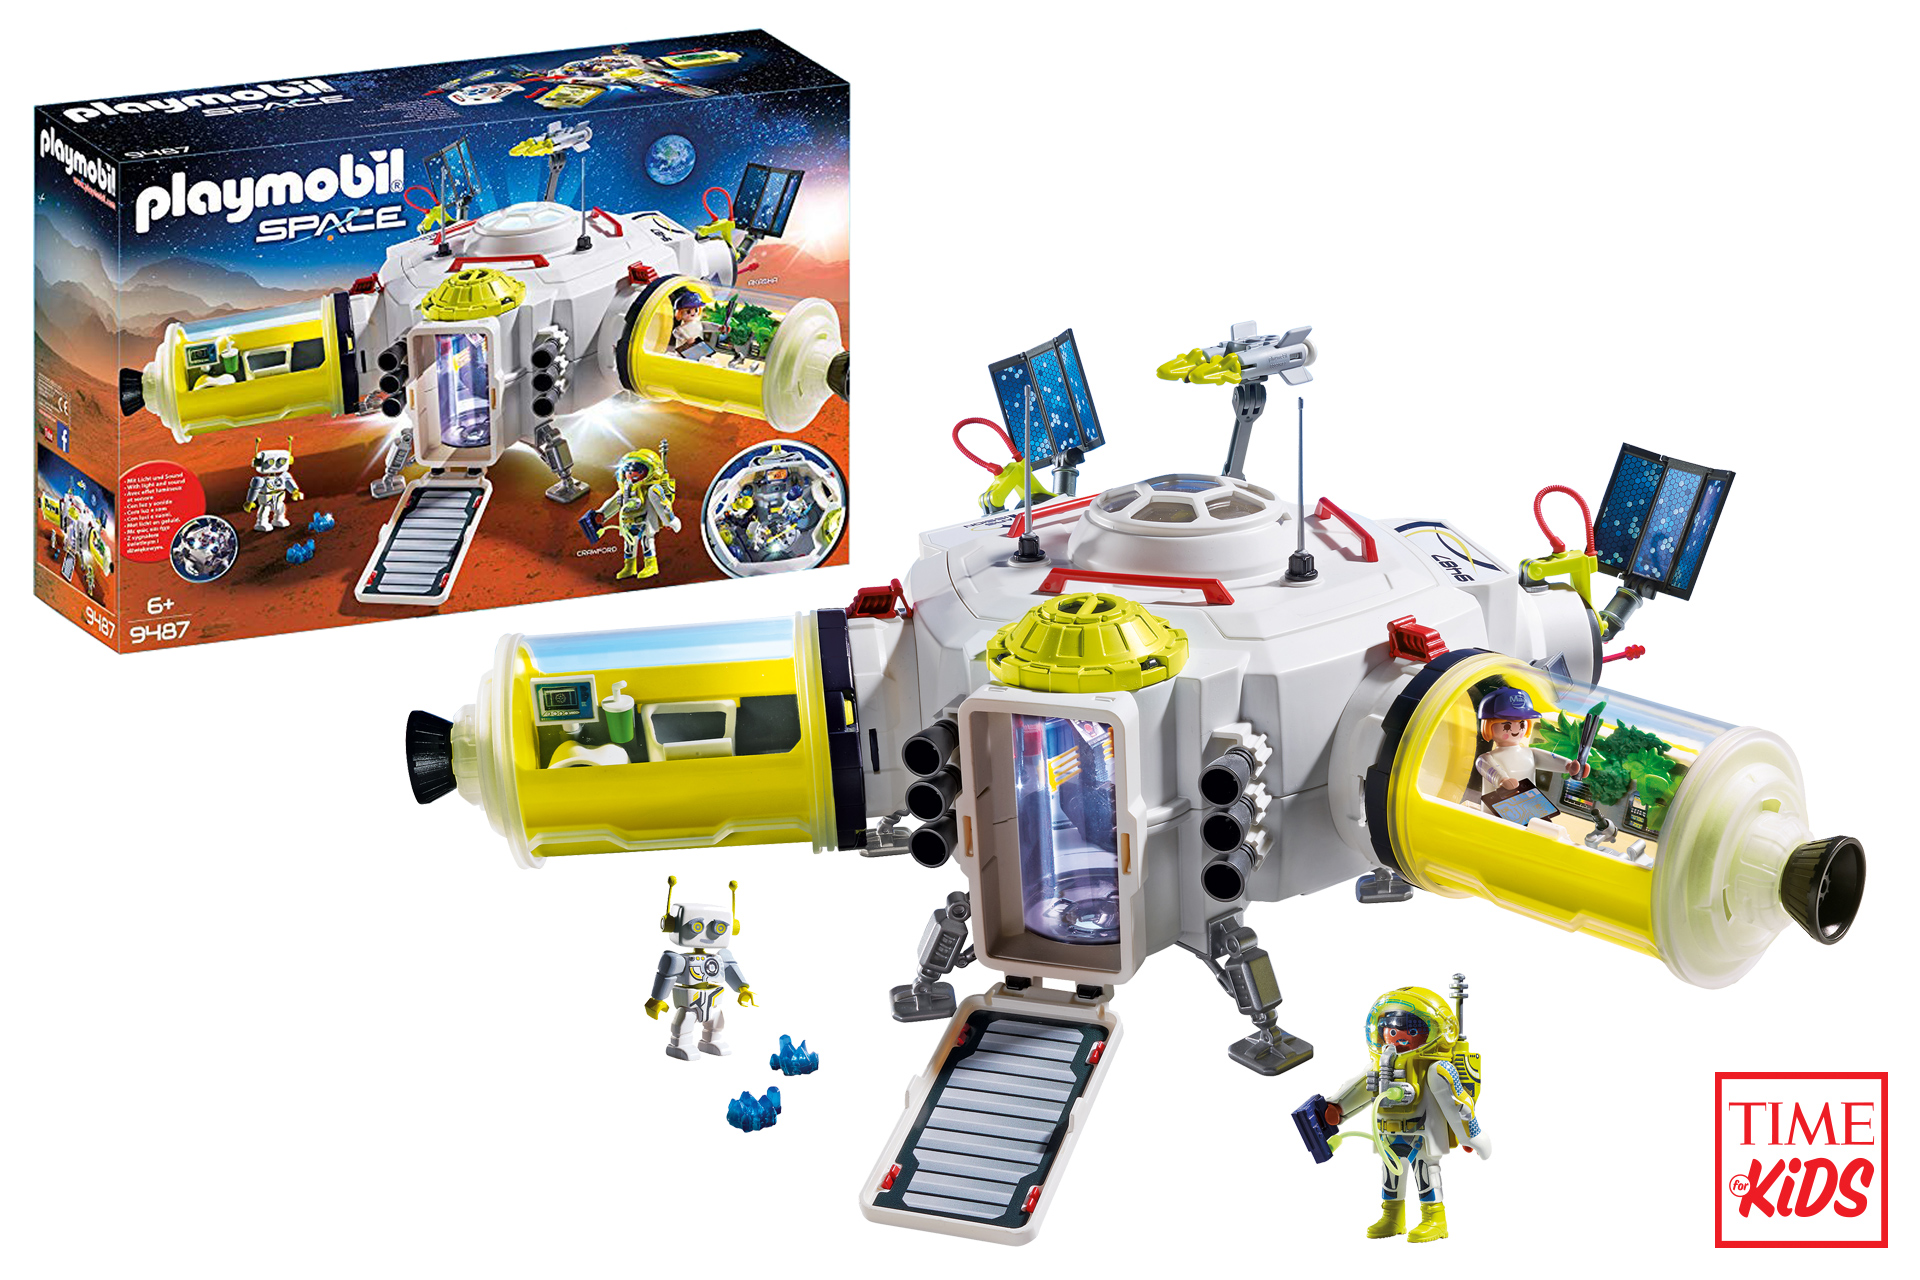 Picture of playmobil Mars Mission set for toy guide.